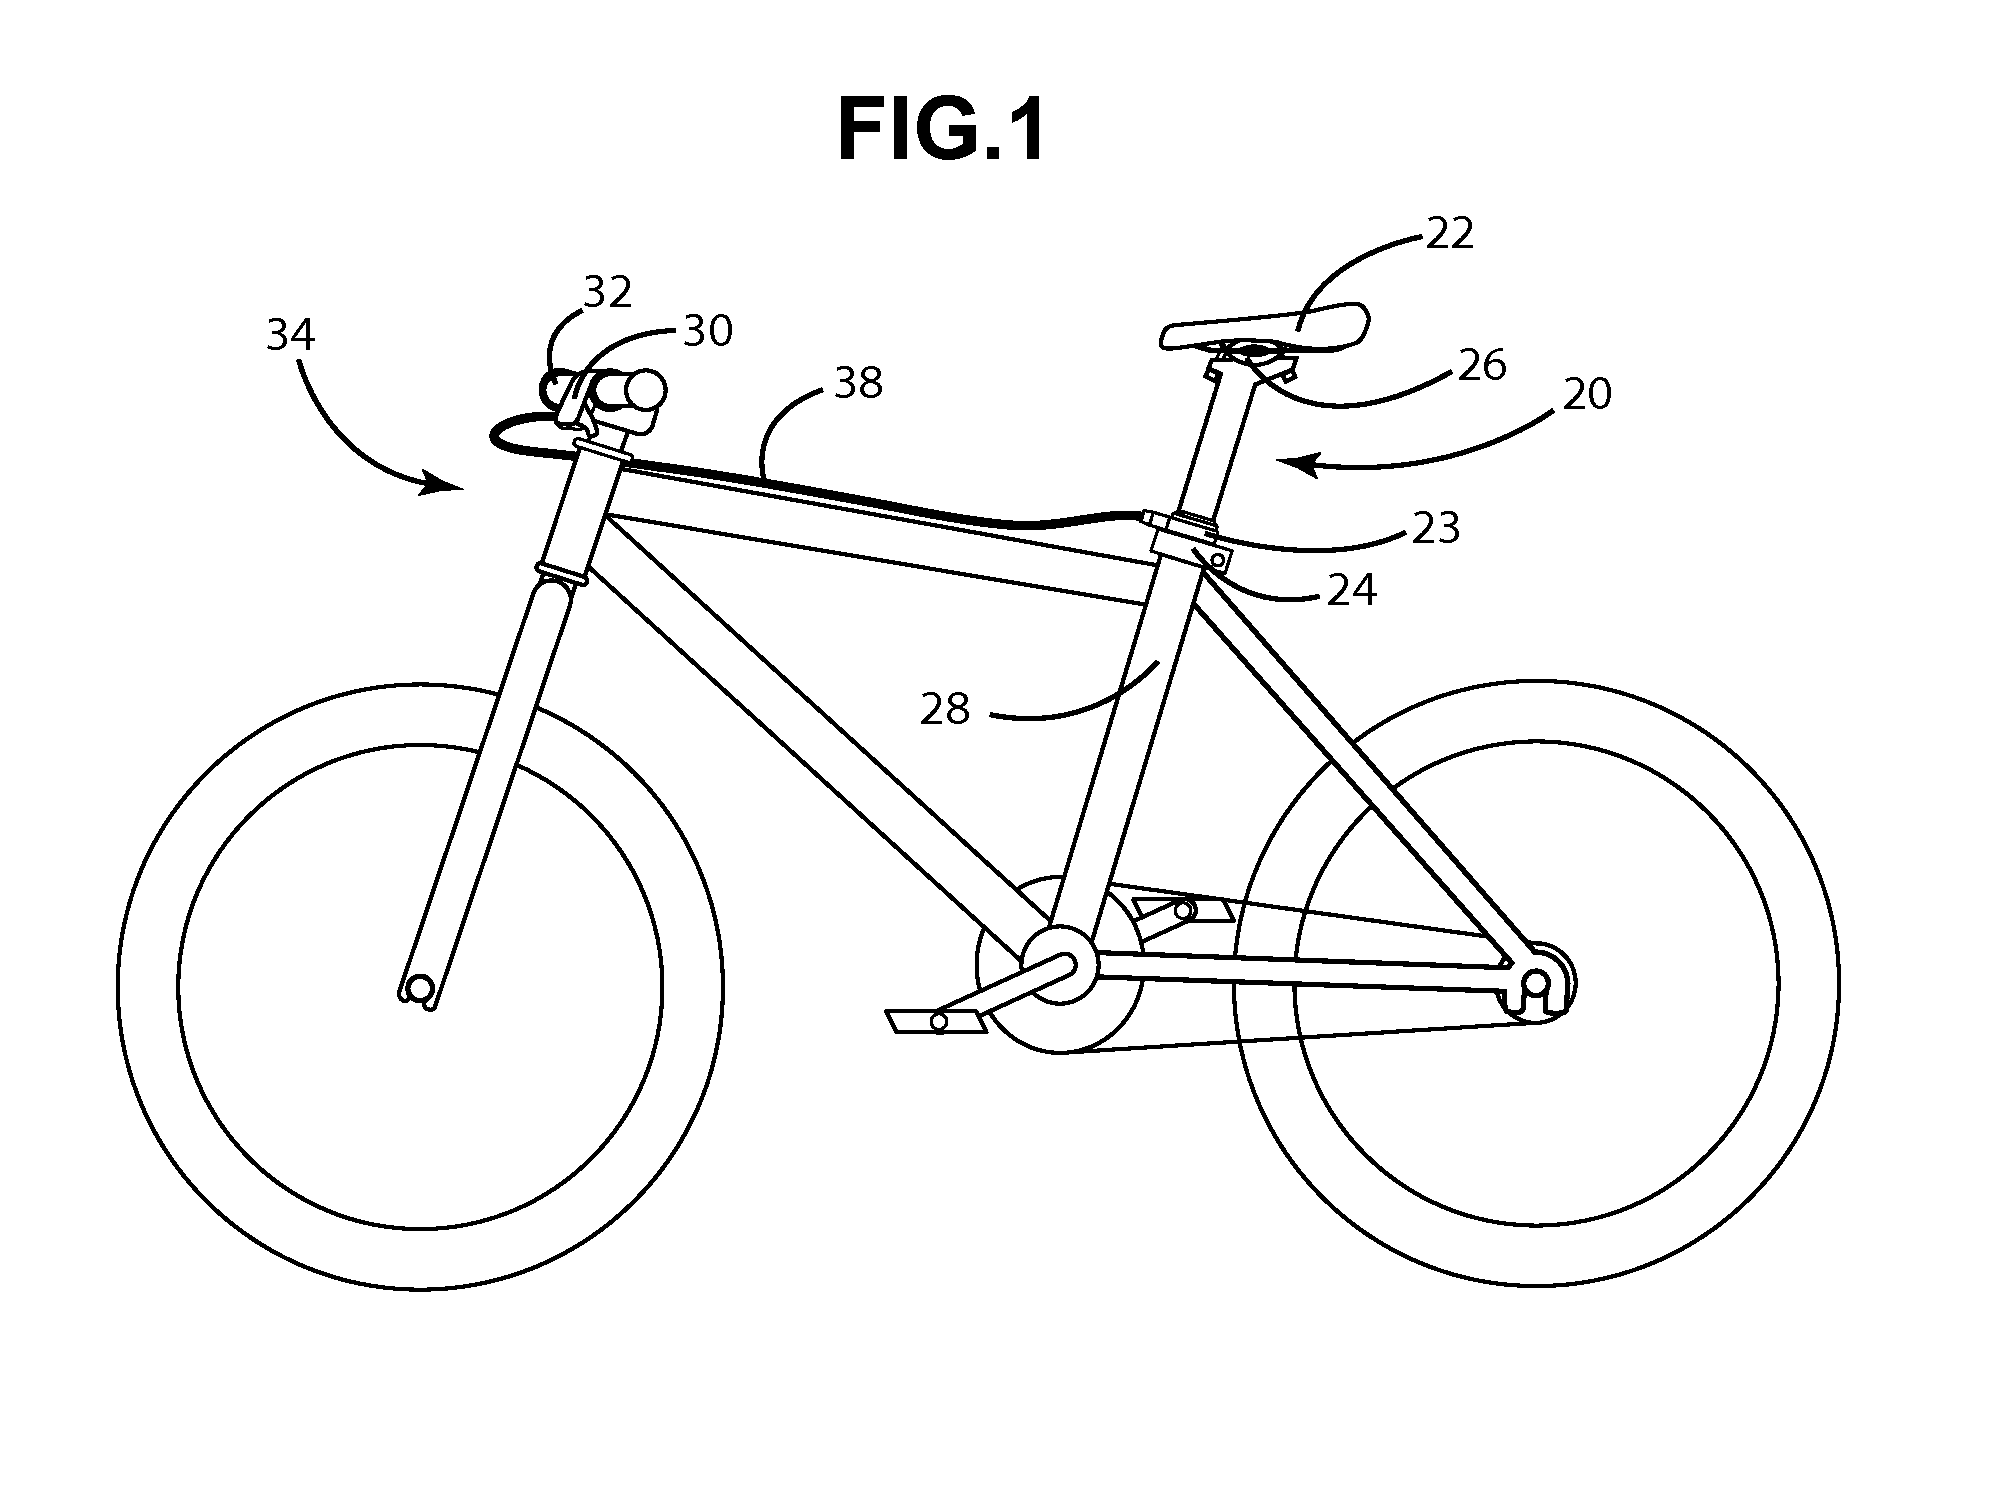 Bicycle seat height adjusting assembly